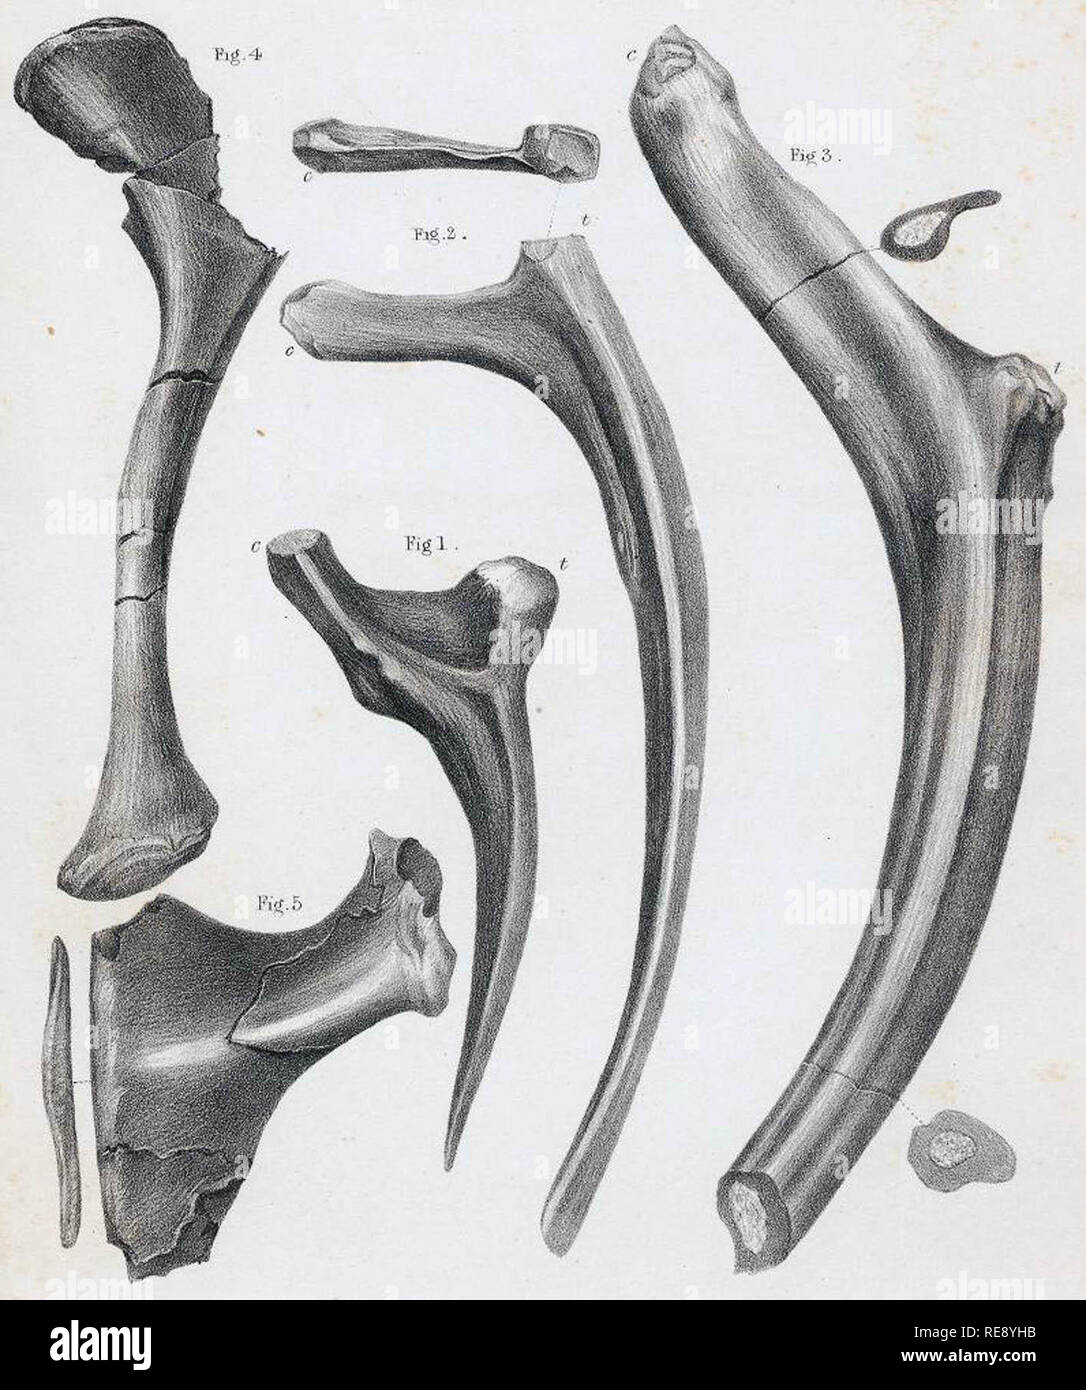 Ribs and pelvic elements. The left rib fragment shows a healed fracture at the underside of the base of the capitulum. Work from the 1800s drawn by J. Erxleben Stock Photo